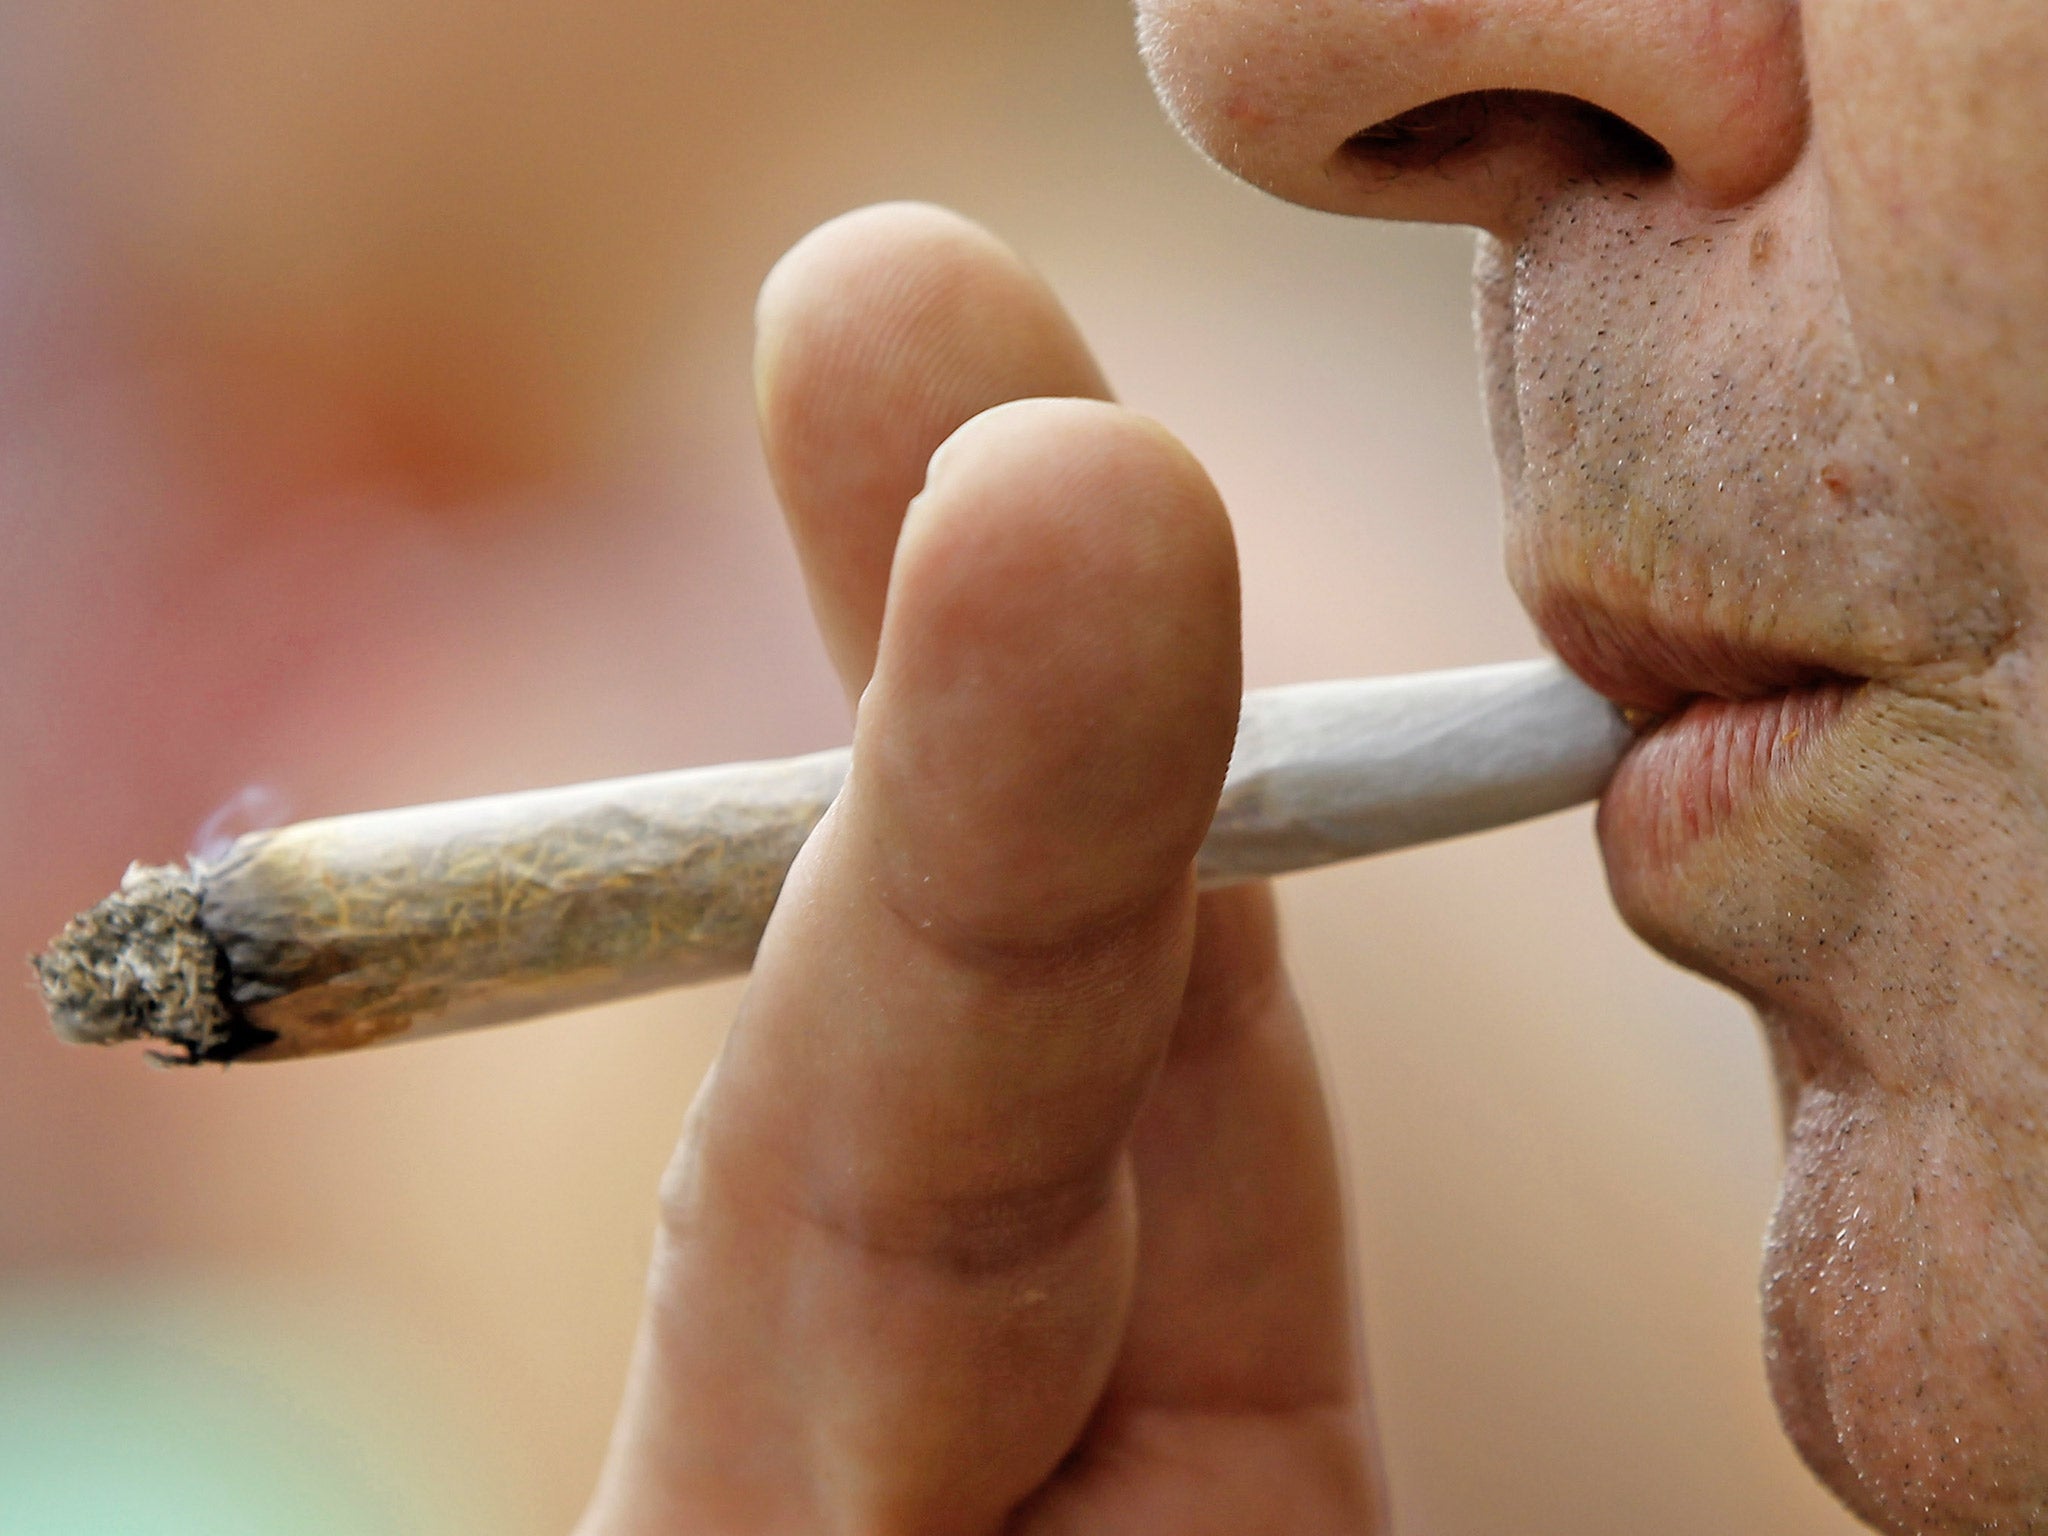 Cigarette After - Porn during lunch breaks is OK but smoking cannabis can get you sacked,  Italy's highest court rules | The Independent | The Independent